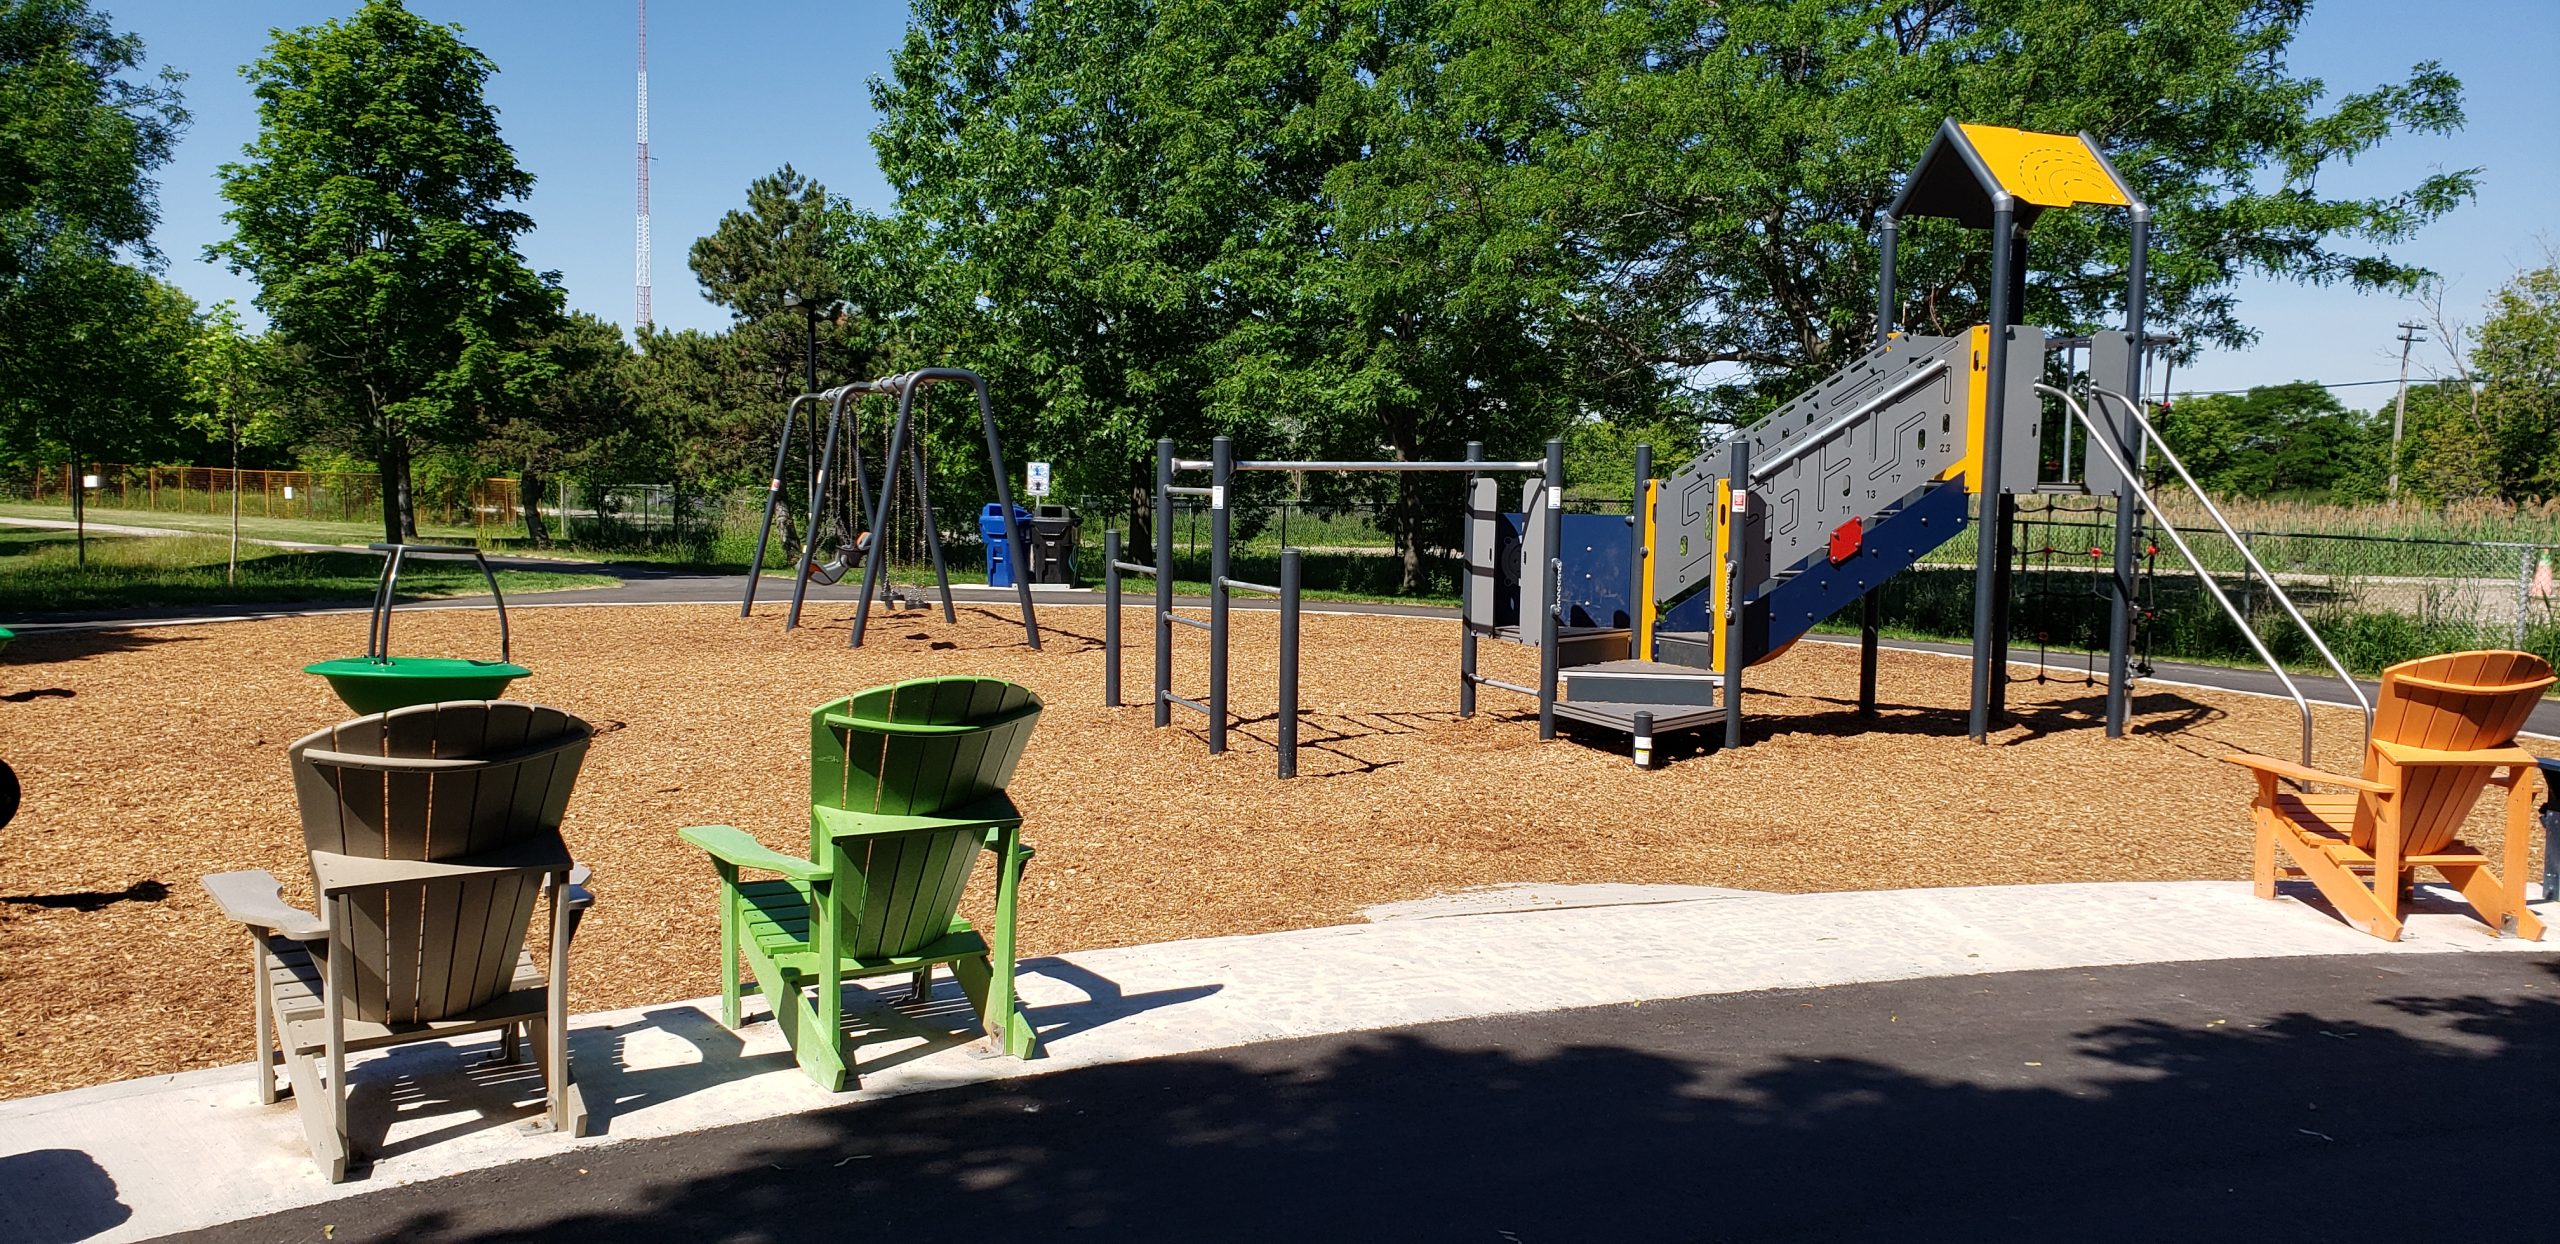 New play equipment at Natal Park, including climbing structure, accessible swing set and balance spinner on a wood fiber play surface. Play area is bordered by a paved pathway and Muskoka chairs.